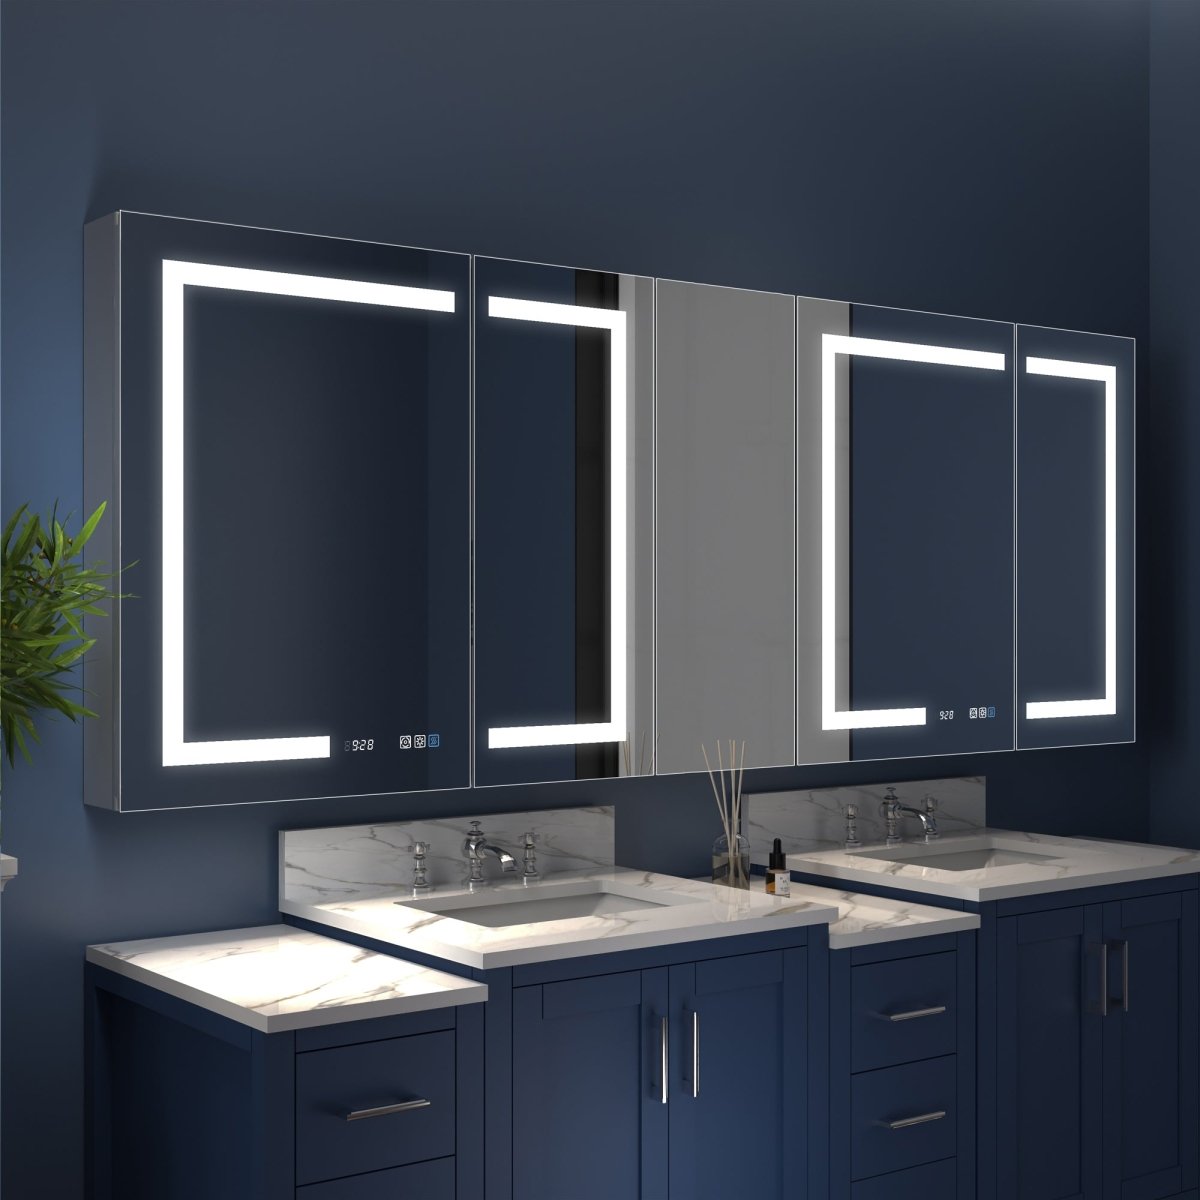 Boost-M2 84" W x 32" H Bathroom Narrow Light Medicine Cabinets with Vanity Mirror Recessed or Surface